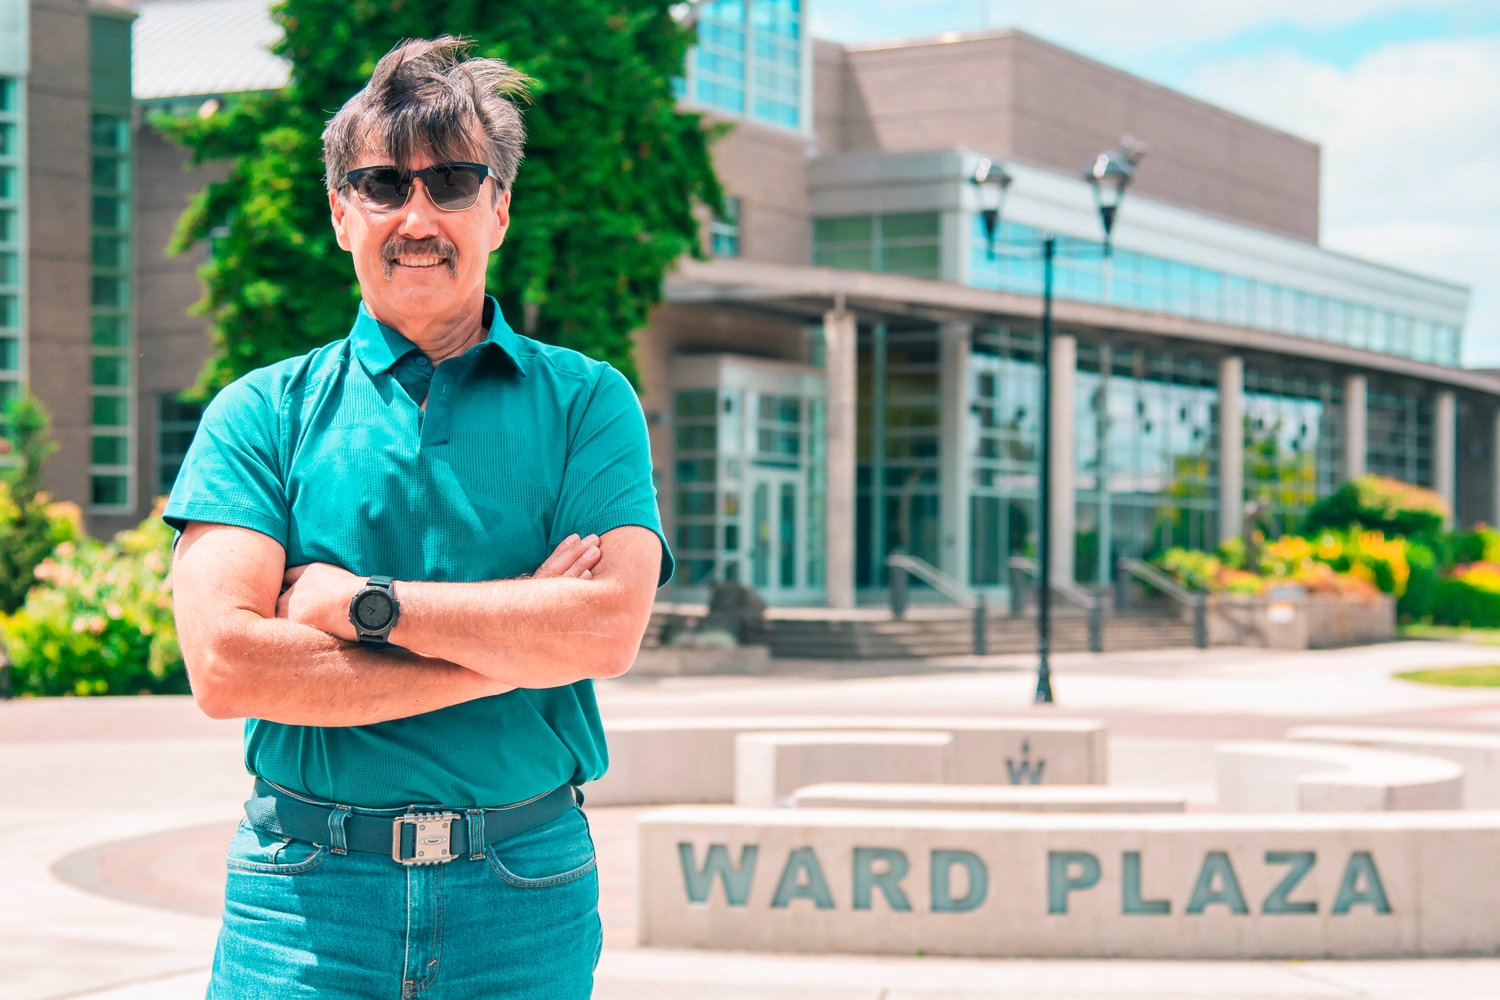 Steve Ward poses for a photo Wednesday afternoon in the center of the Centralia College campus aptly named Ward Plaza.